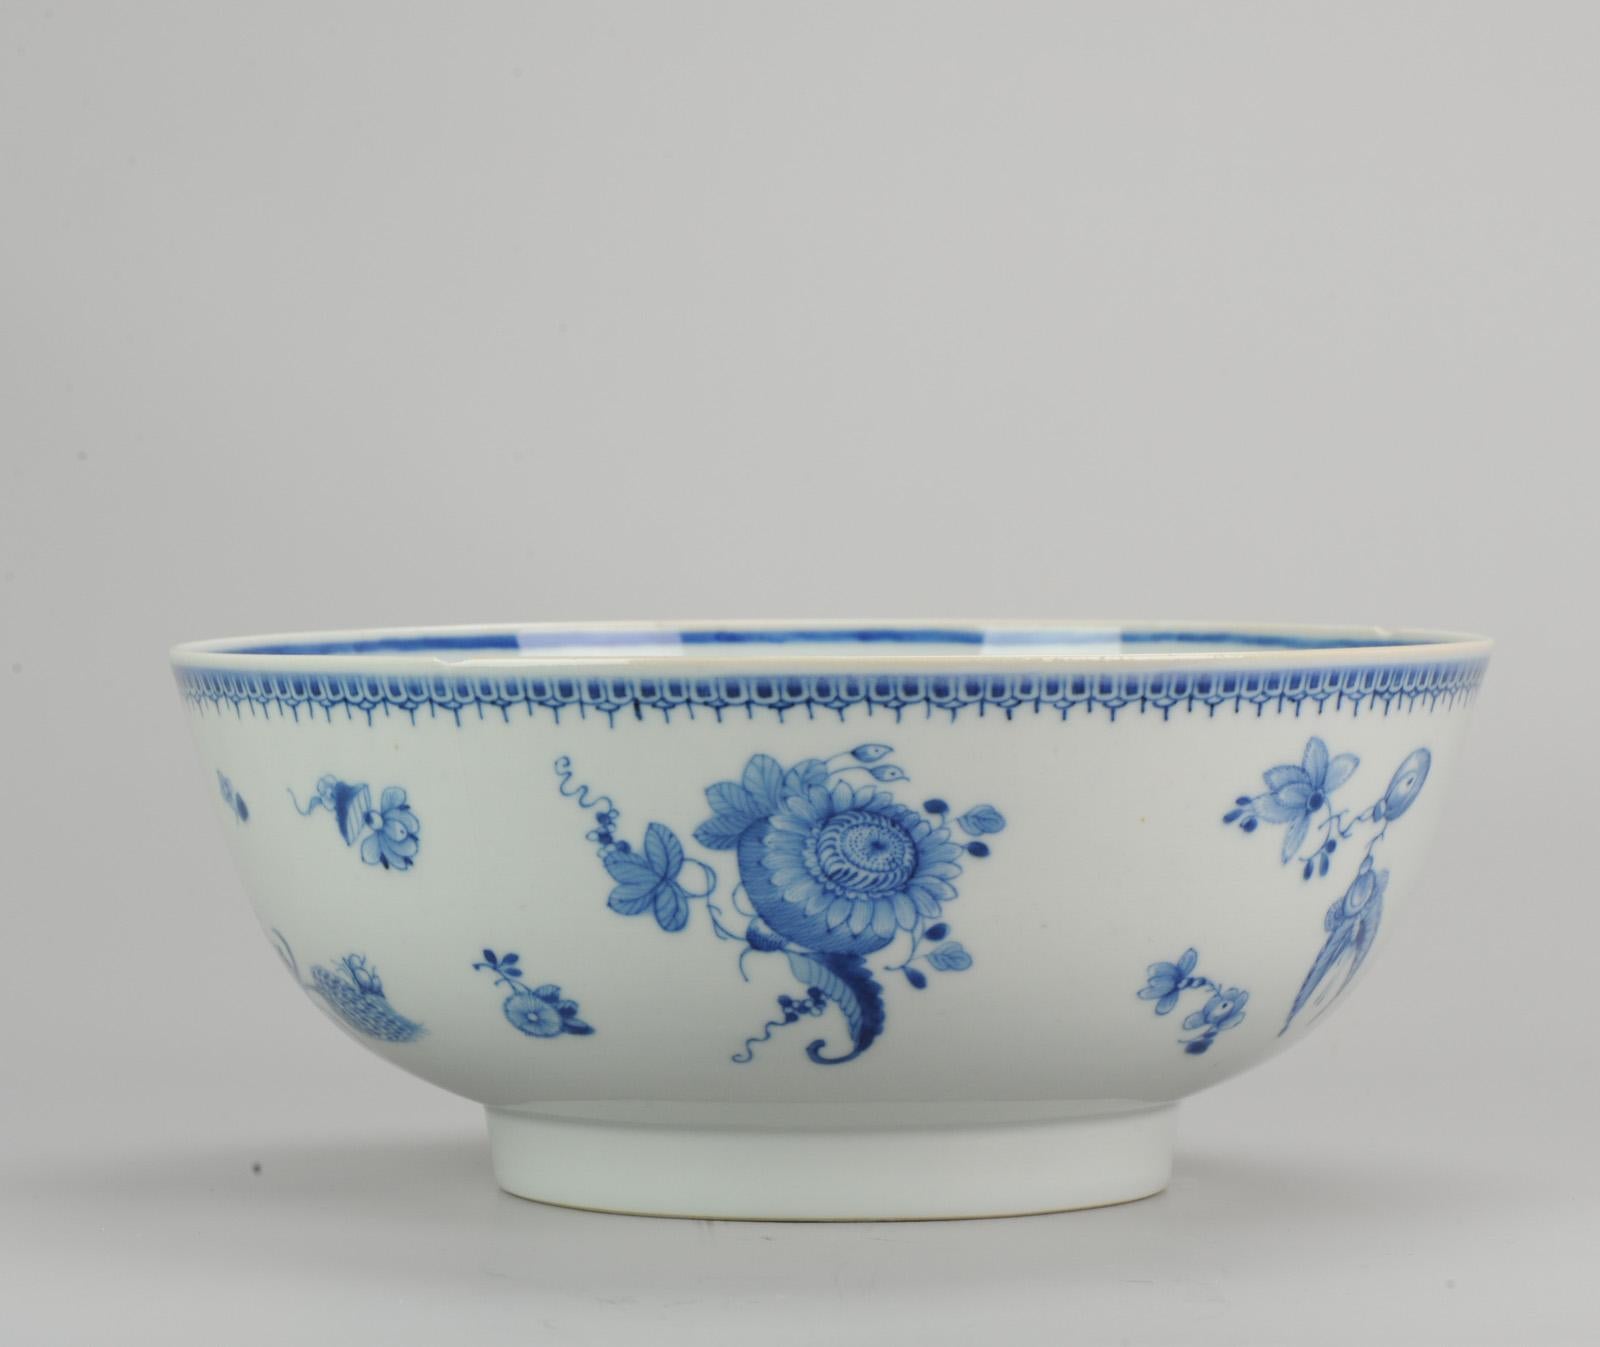 A very nicely decorated bowl. Dating to circa 1730-1740

10-10-19-2-1

Condition
Overall Condition 2 chips and 2 hairlines. 
Period
18th century Qing (1661-1912). Size: 263mm x 110mm / Inch 10.4